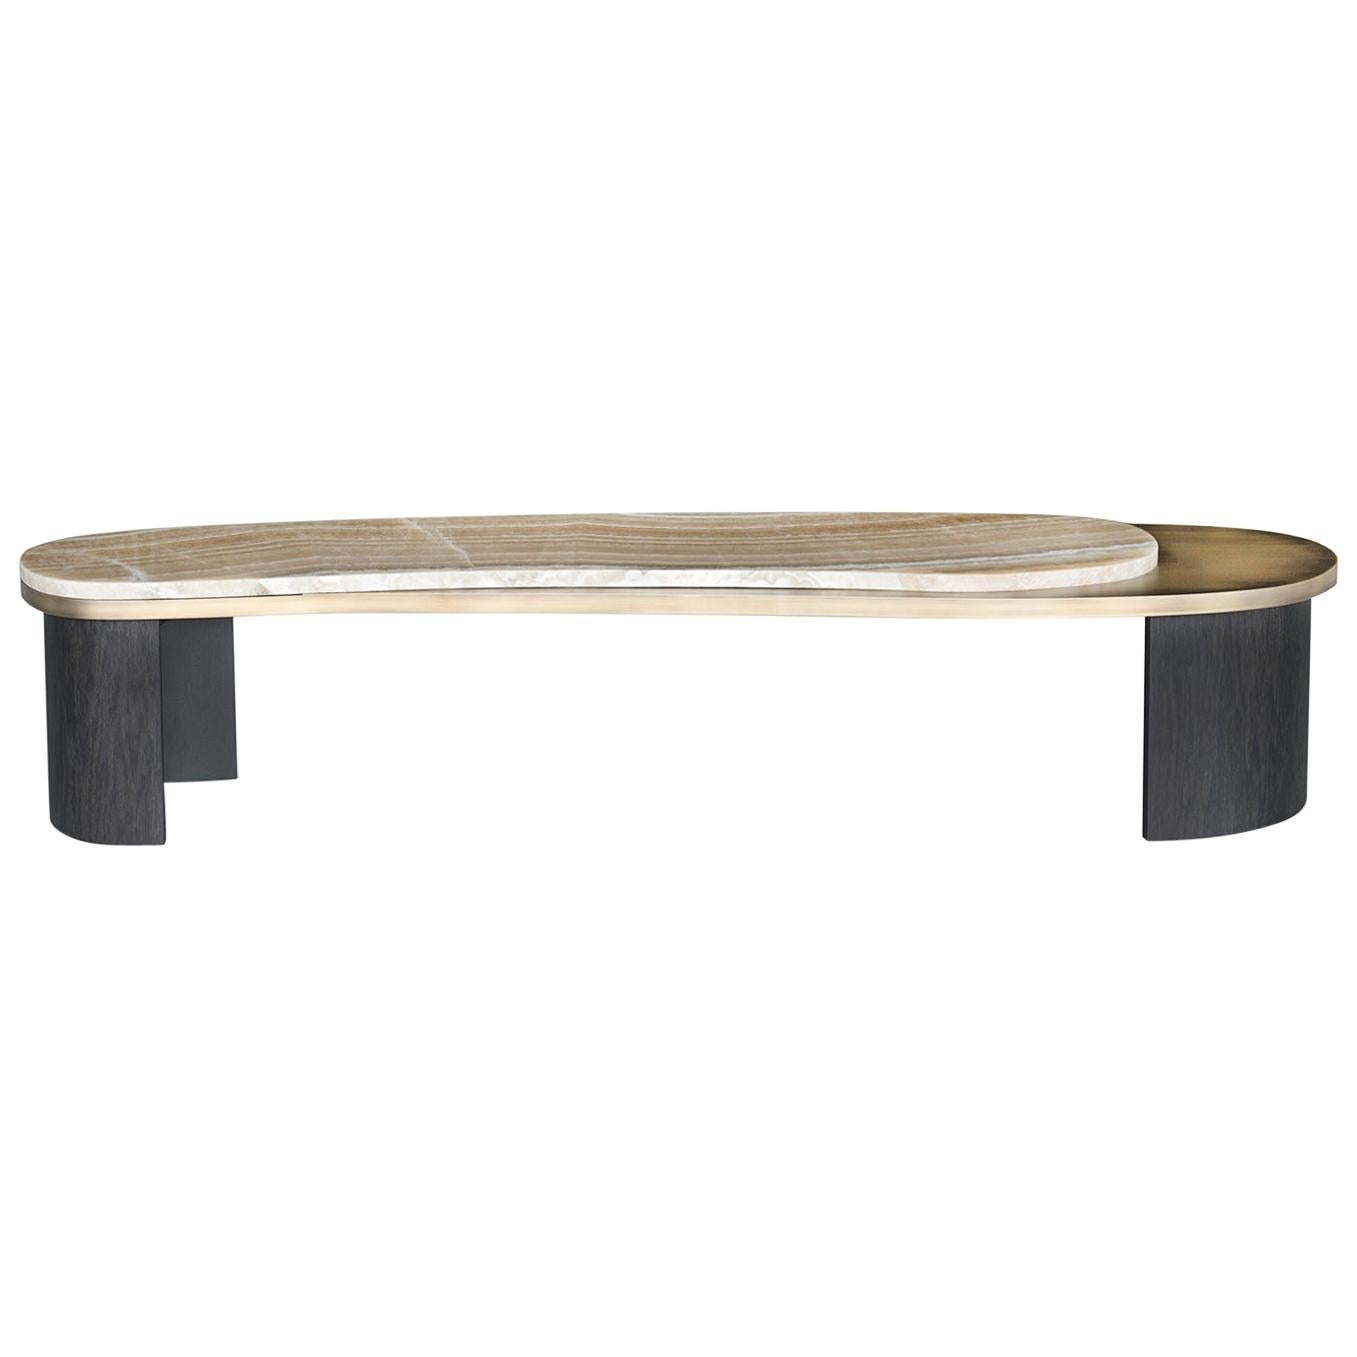 Armona Coffee Table, Contemporary Collection, Handcrafted in Portugal - Europe by Greenapple.

Designed by Rute Martins for the Contemporary Collection, by using high quality materials and textures Armona is an elegant coffee table that captures the